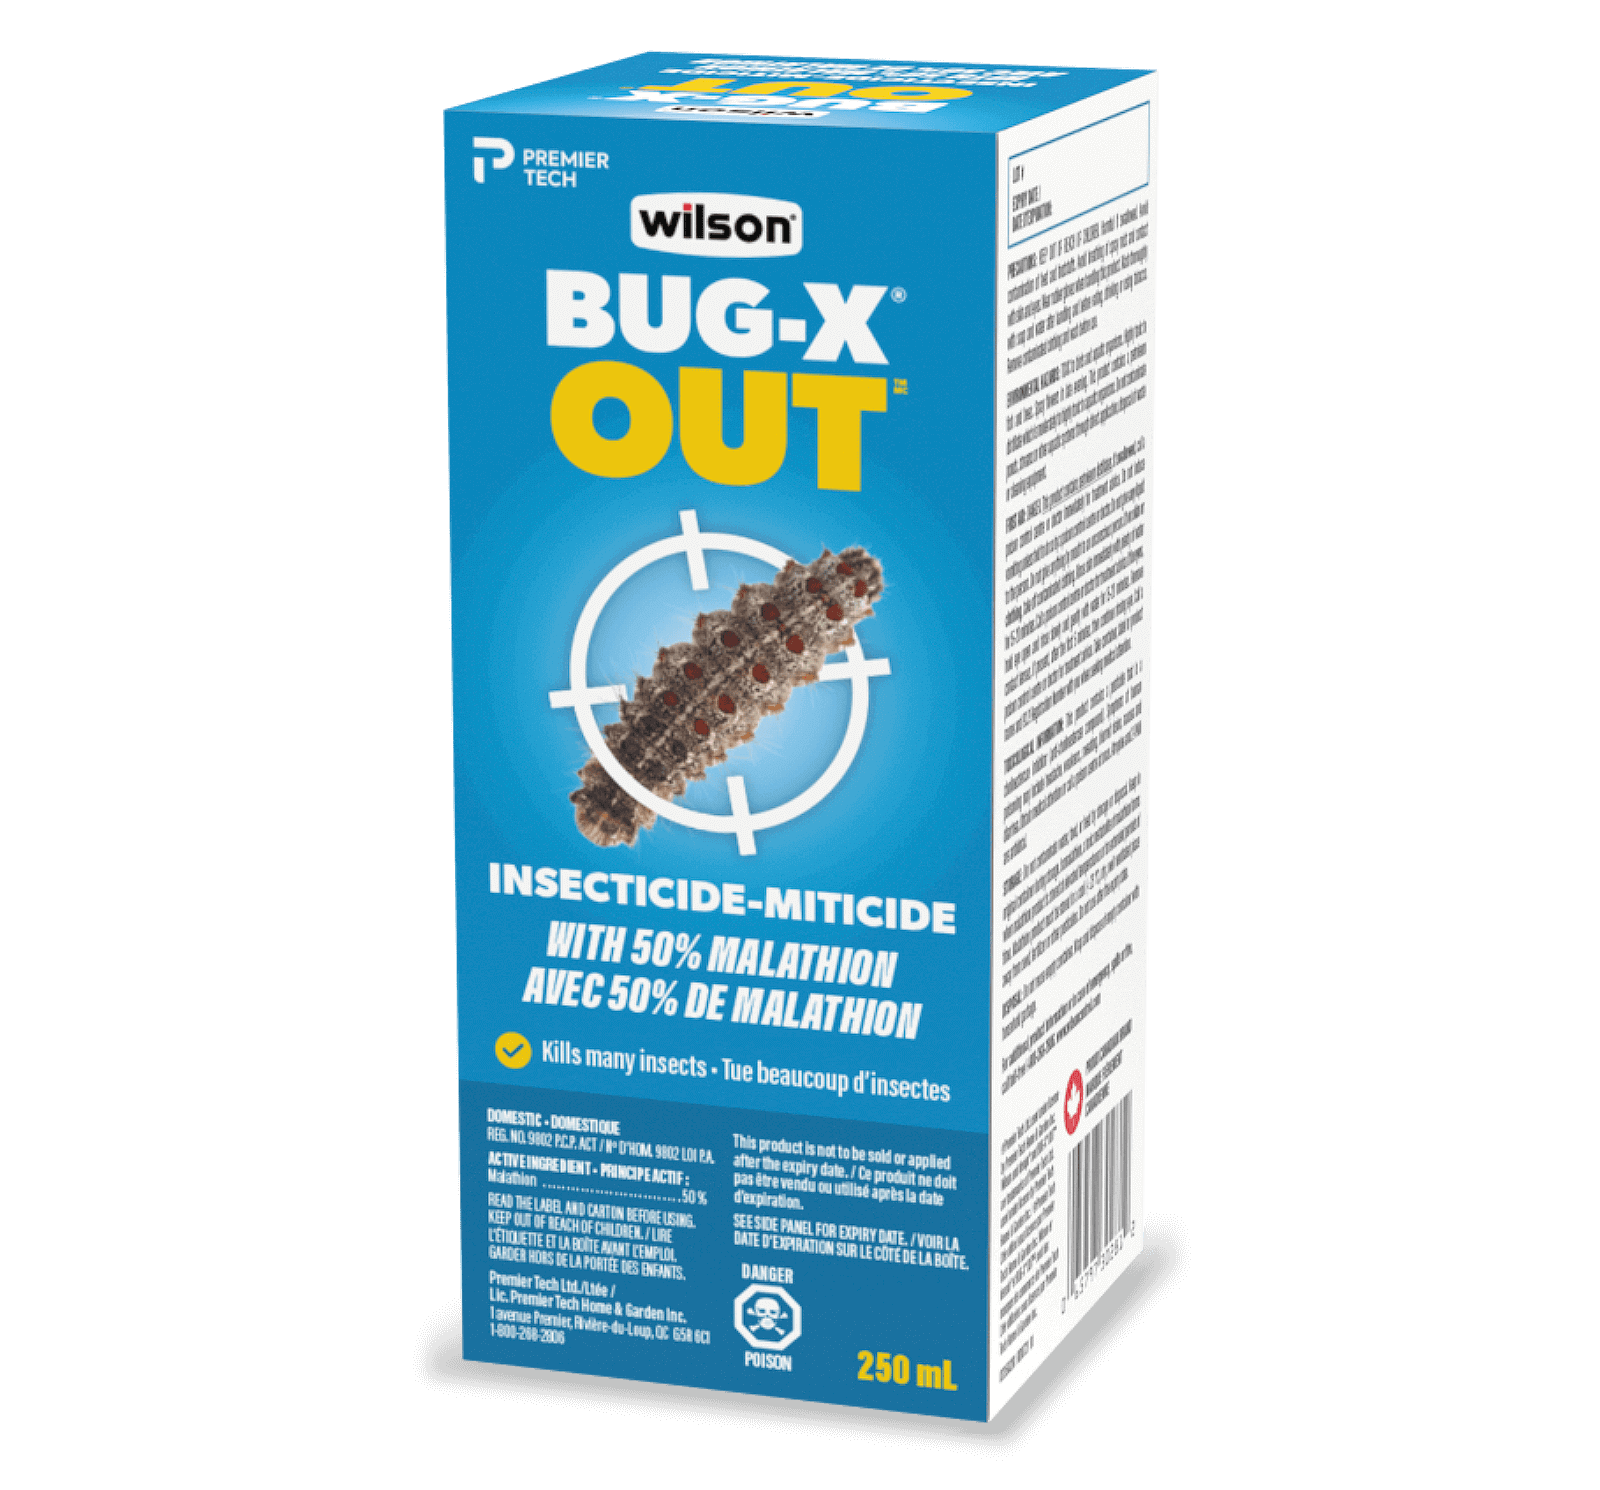 Wilson® BUG-X OUT® Insecticide Miticide with 50% Malathion | Wilson Control